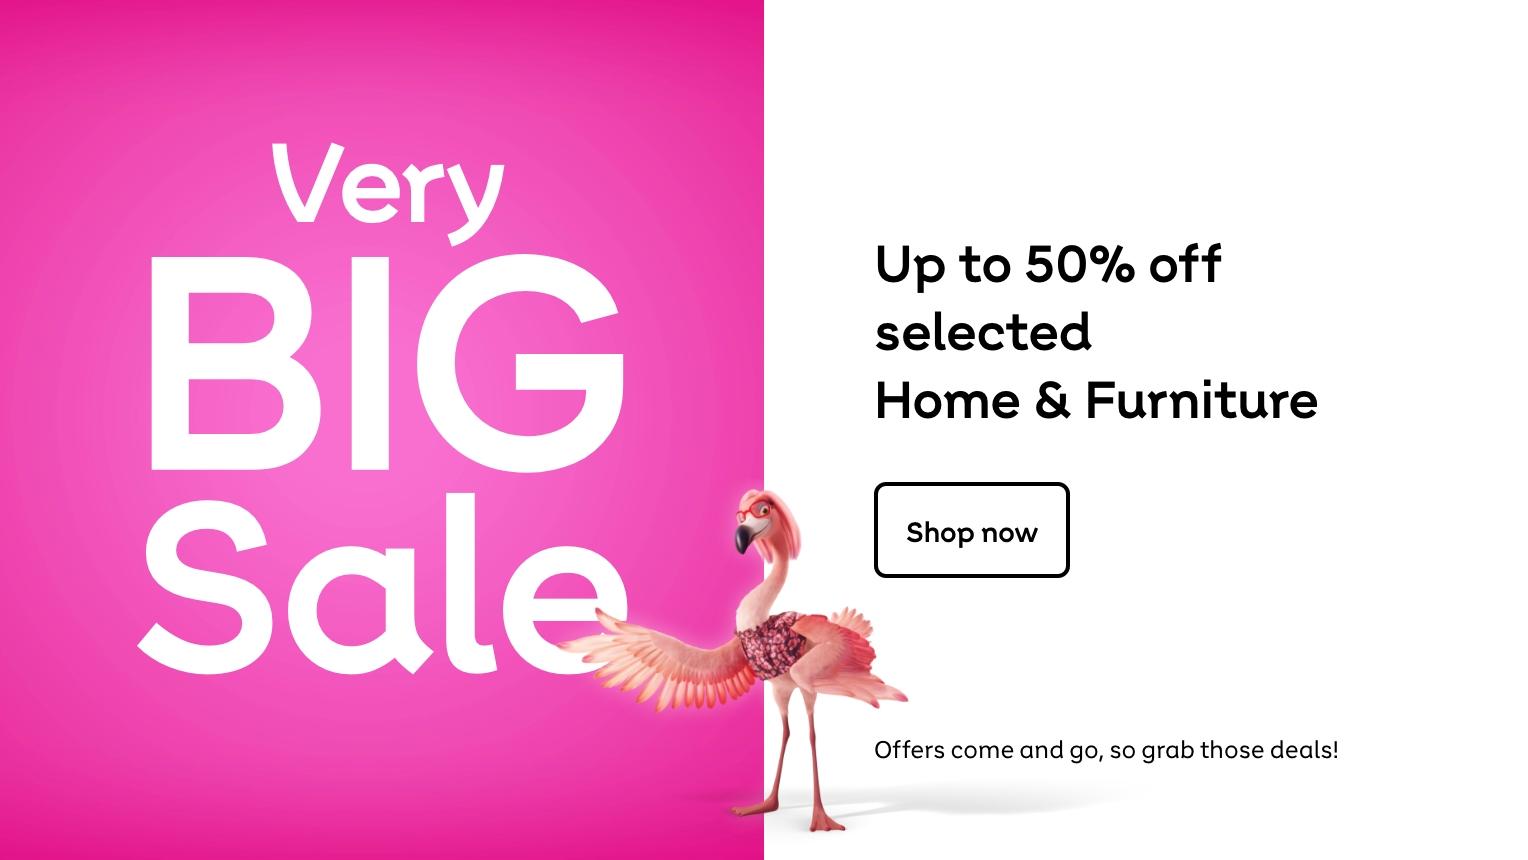 Up to 40% off selected Home & Furniture